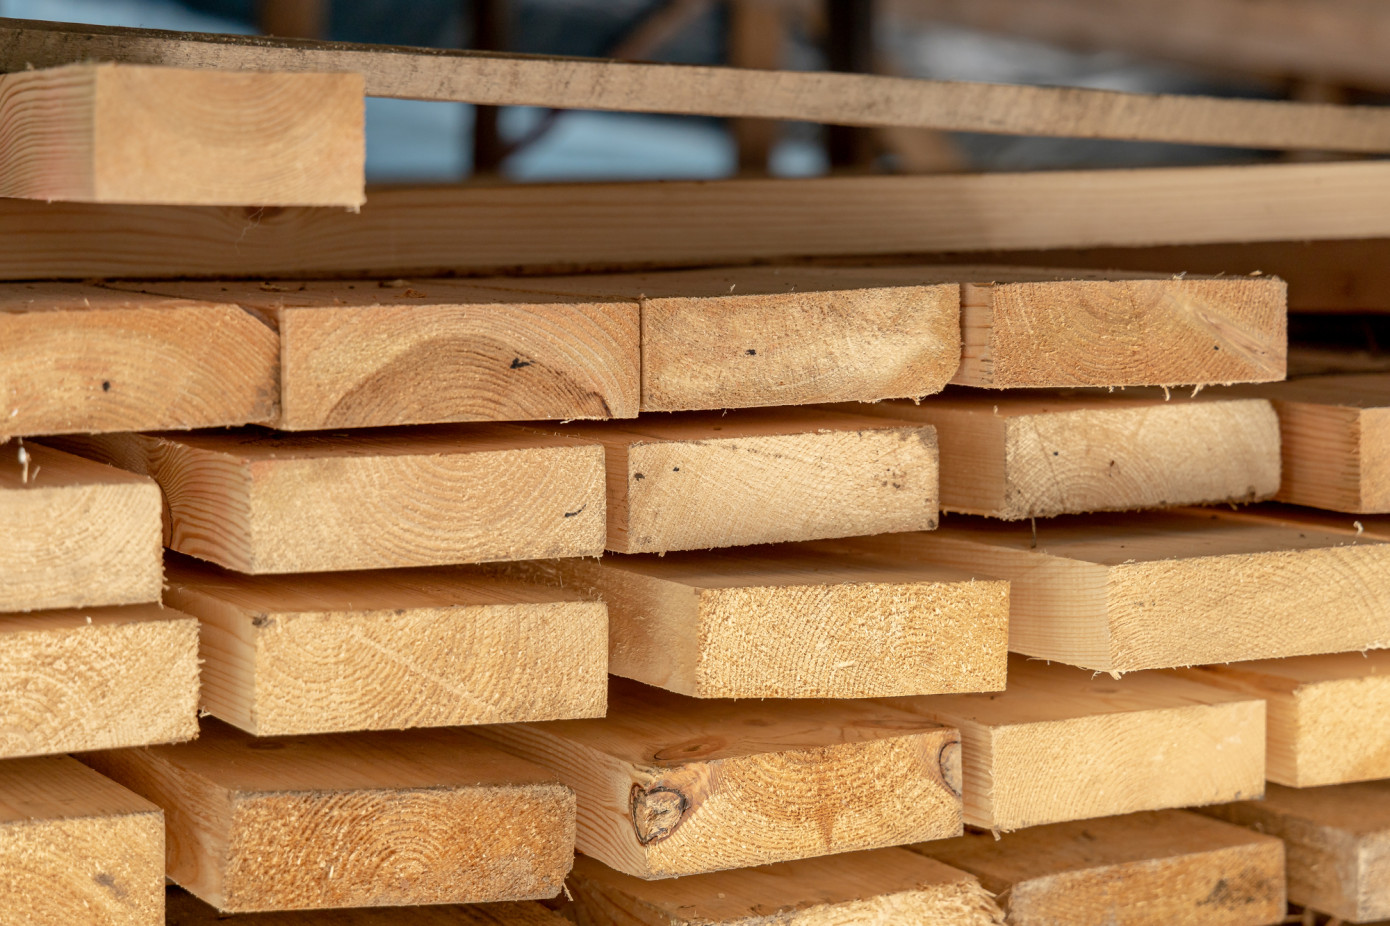 In March, price for lumber exported from Chile grows 8%